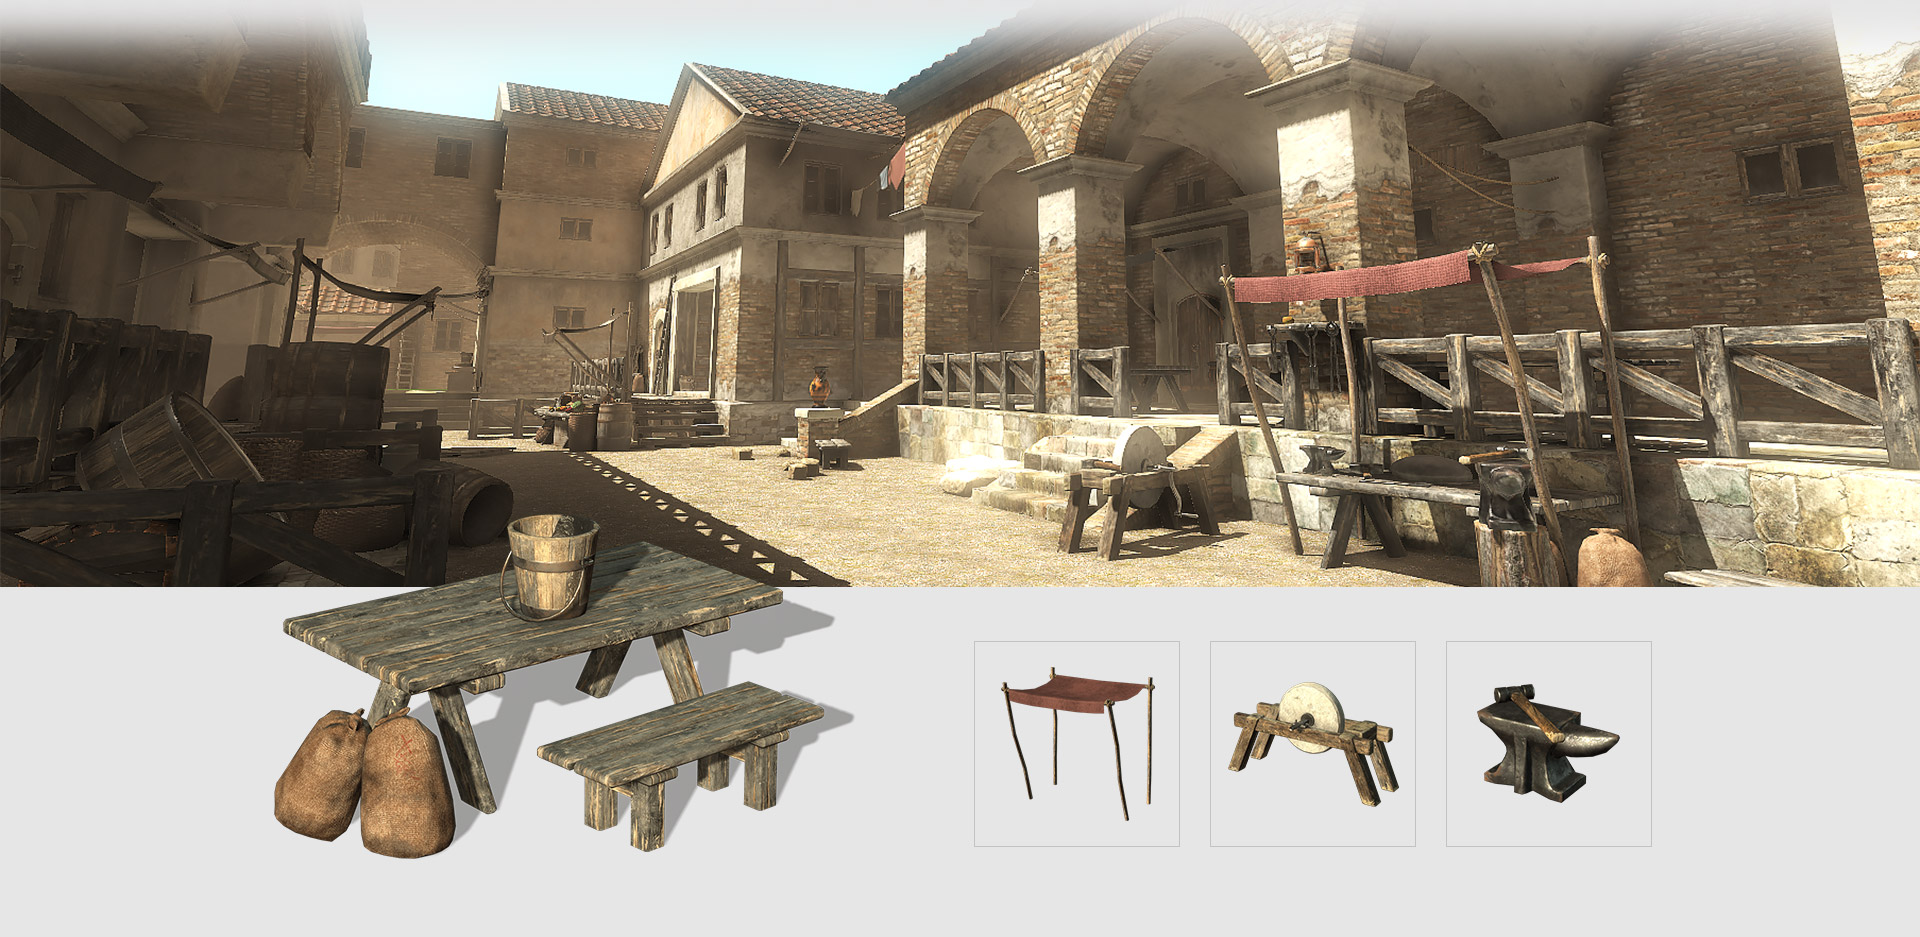 exterior 3d scene - medival and anicient rome square